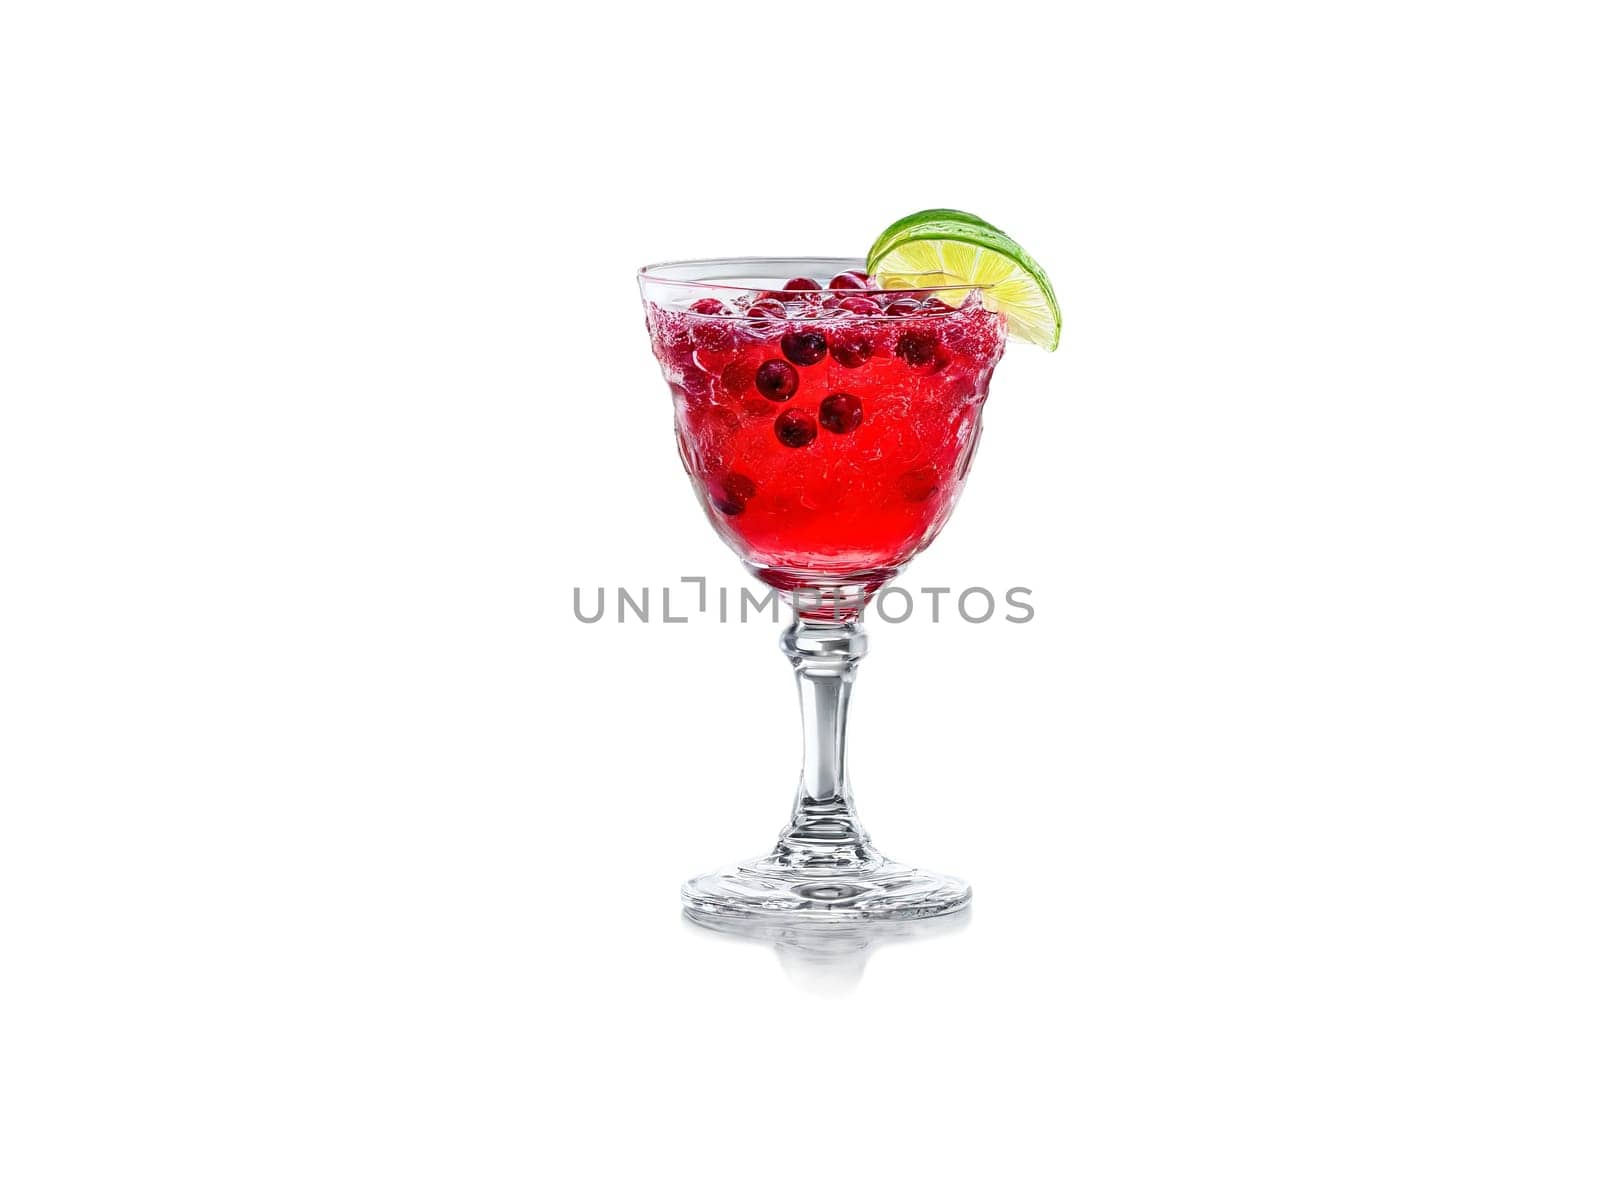 Cranberry soda in a crystal goblet cranberries and lime wedges vibrant red splash in. Drink isolated on transparent background.